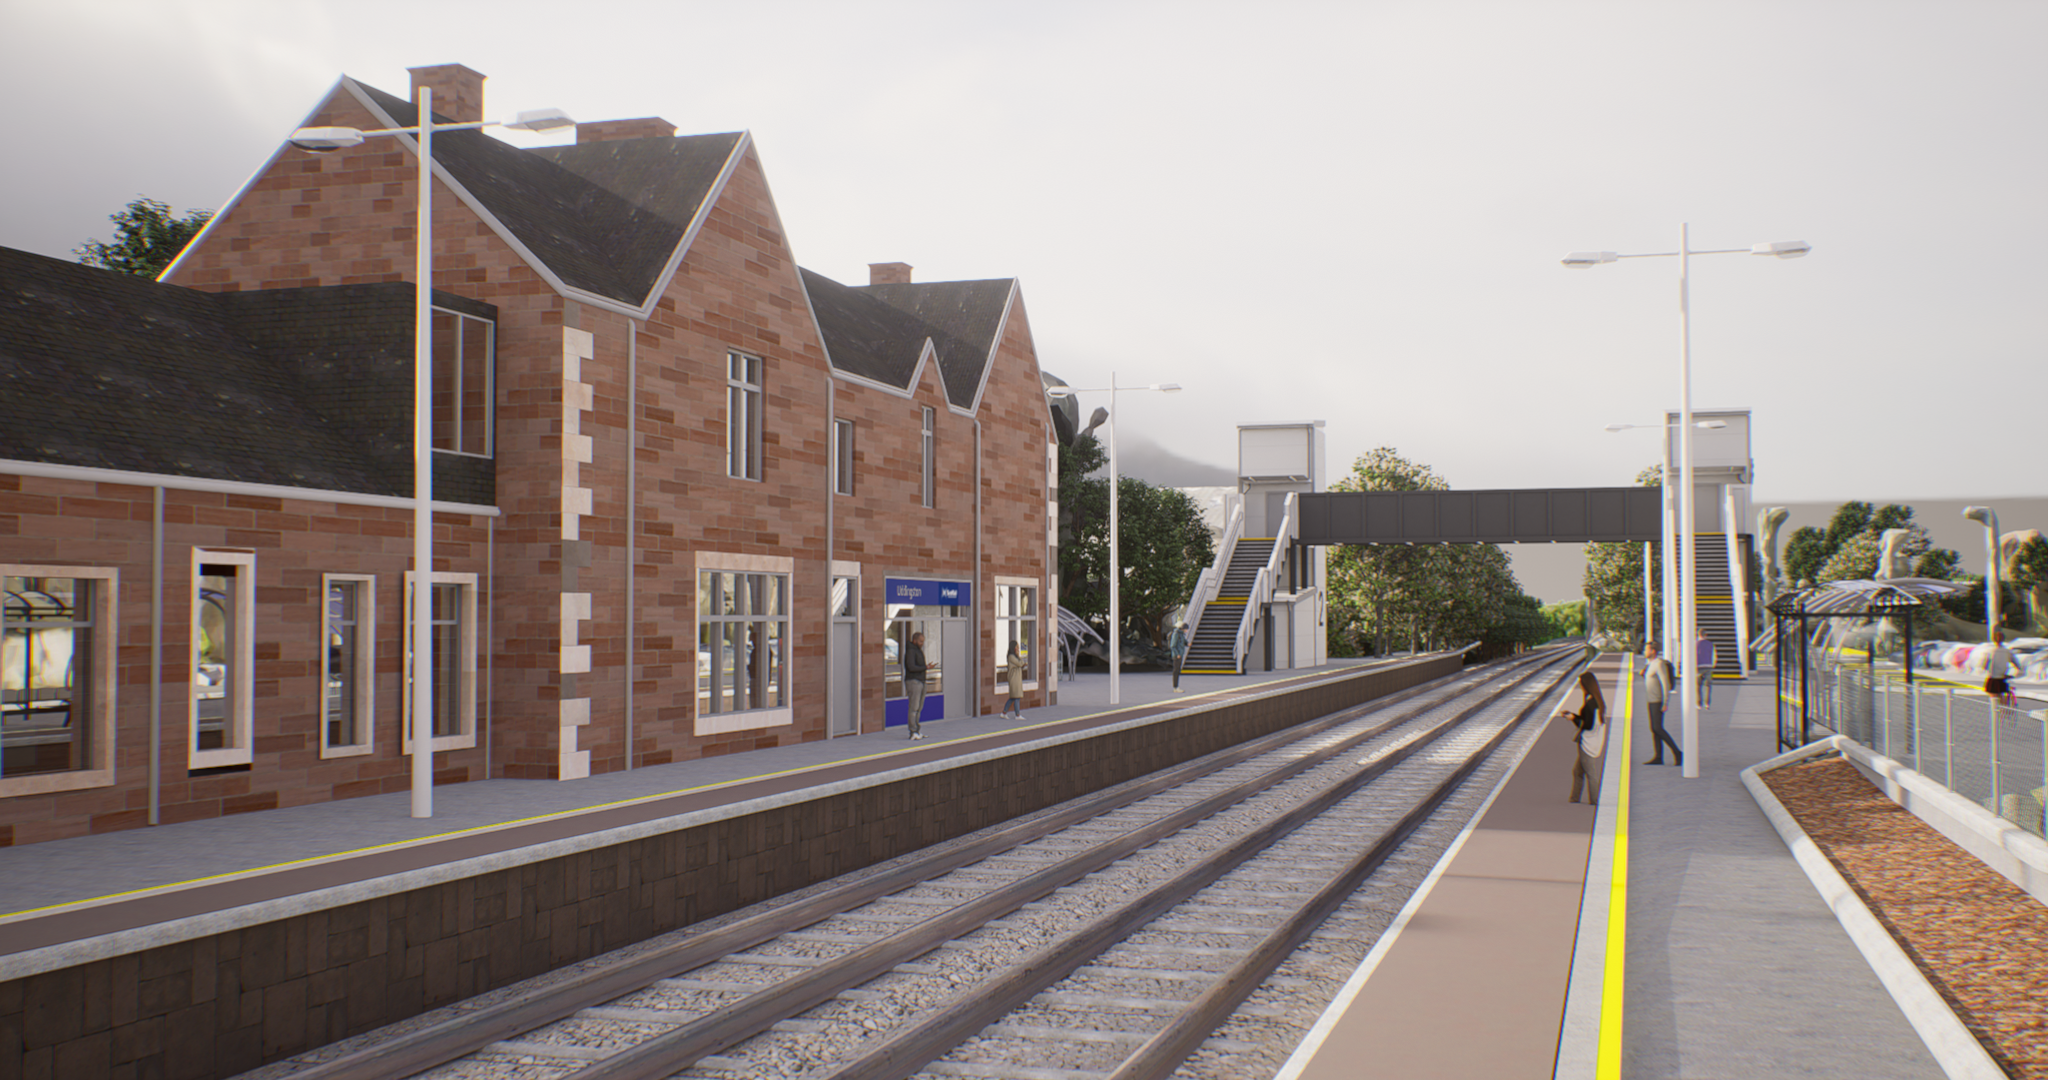 Plans to provide step-free access at Uddingston station